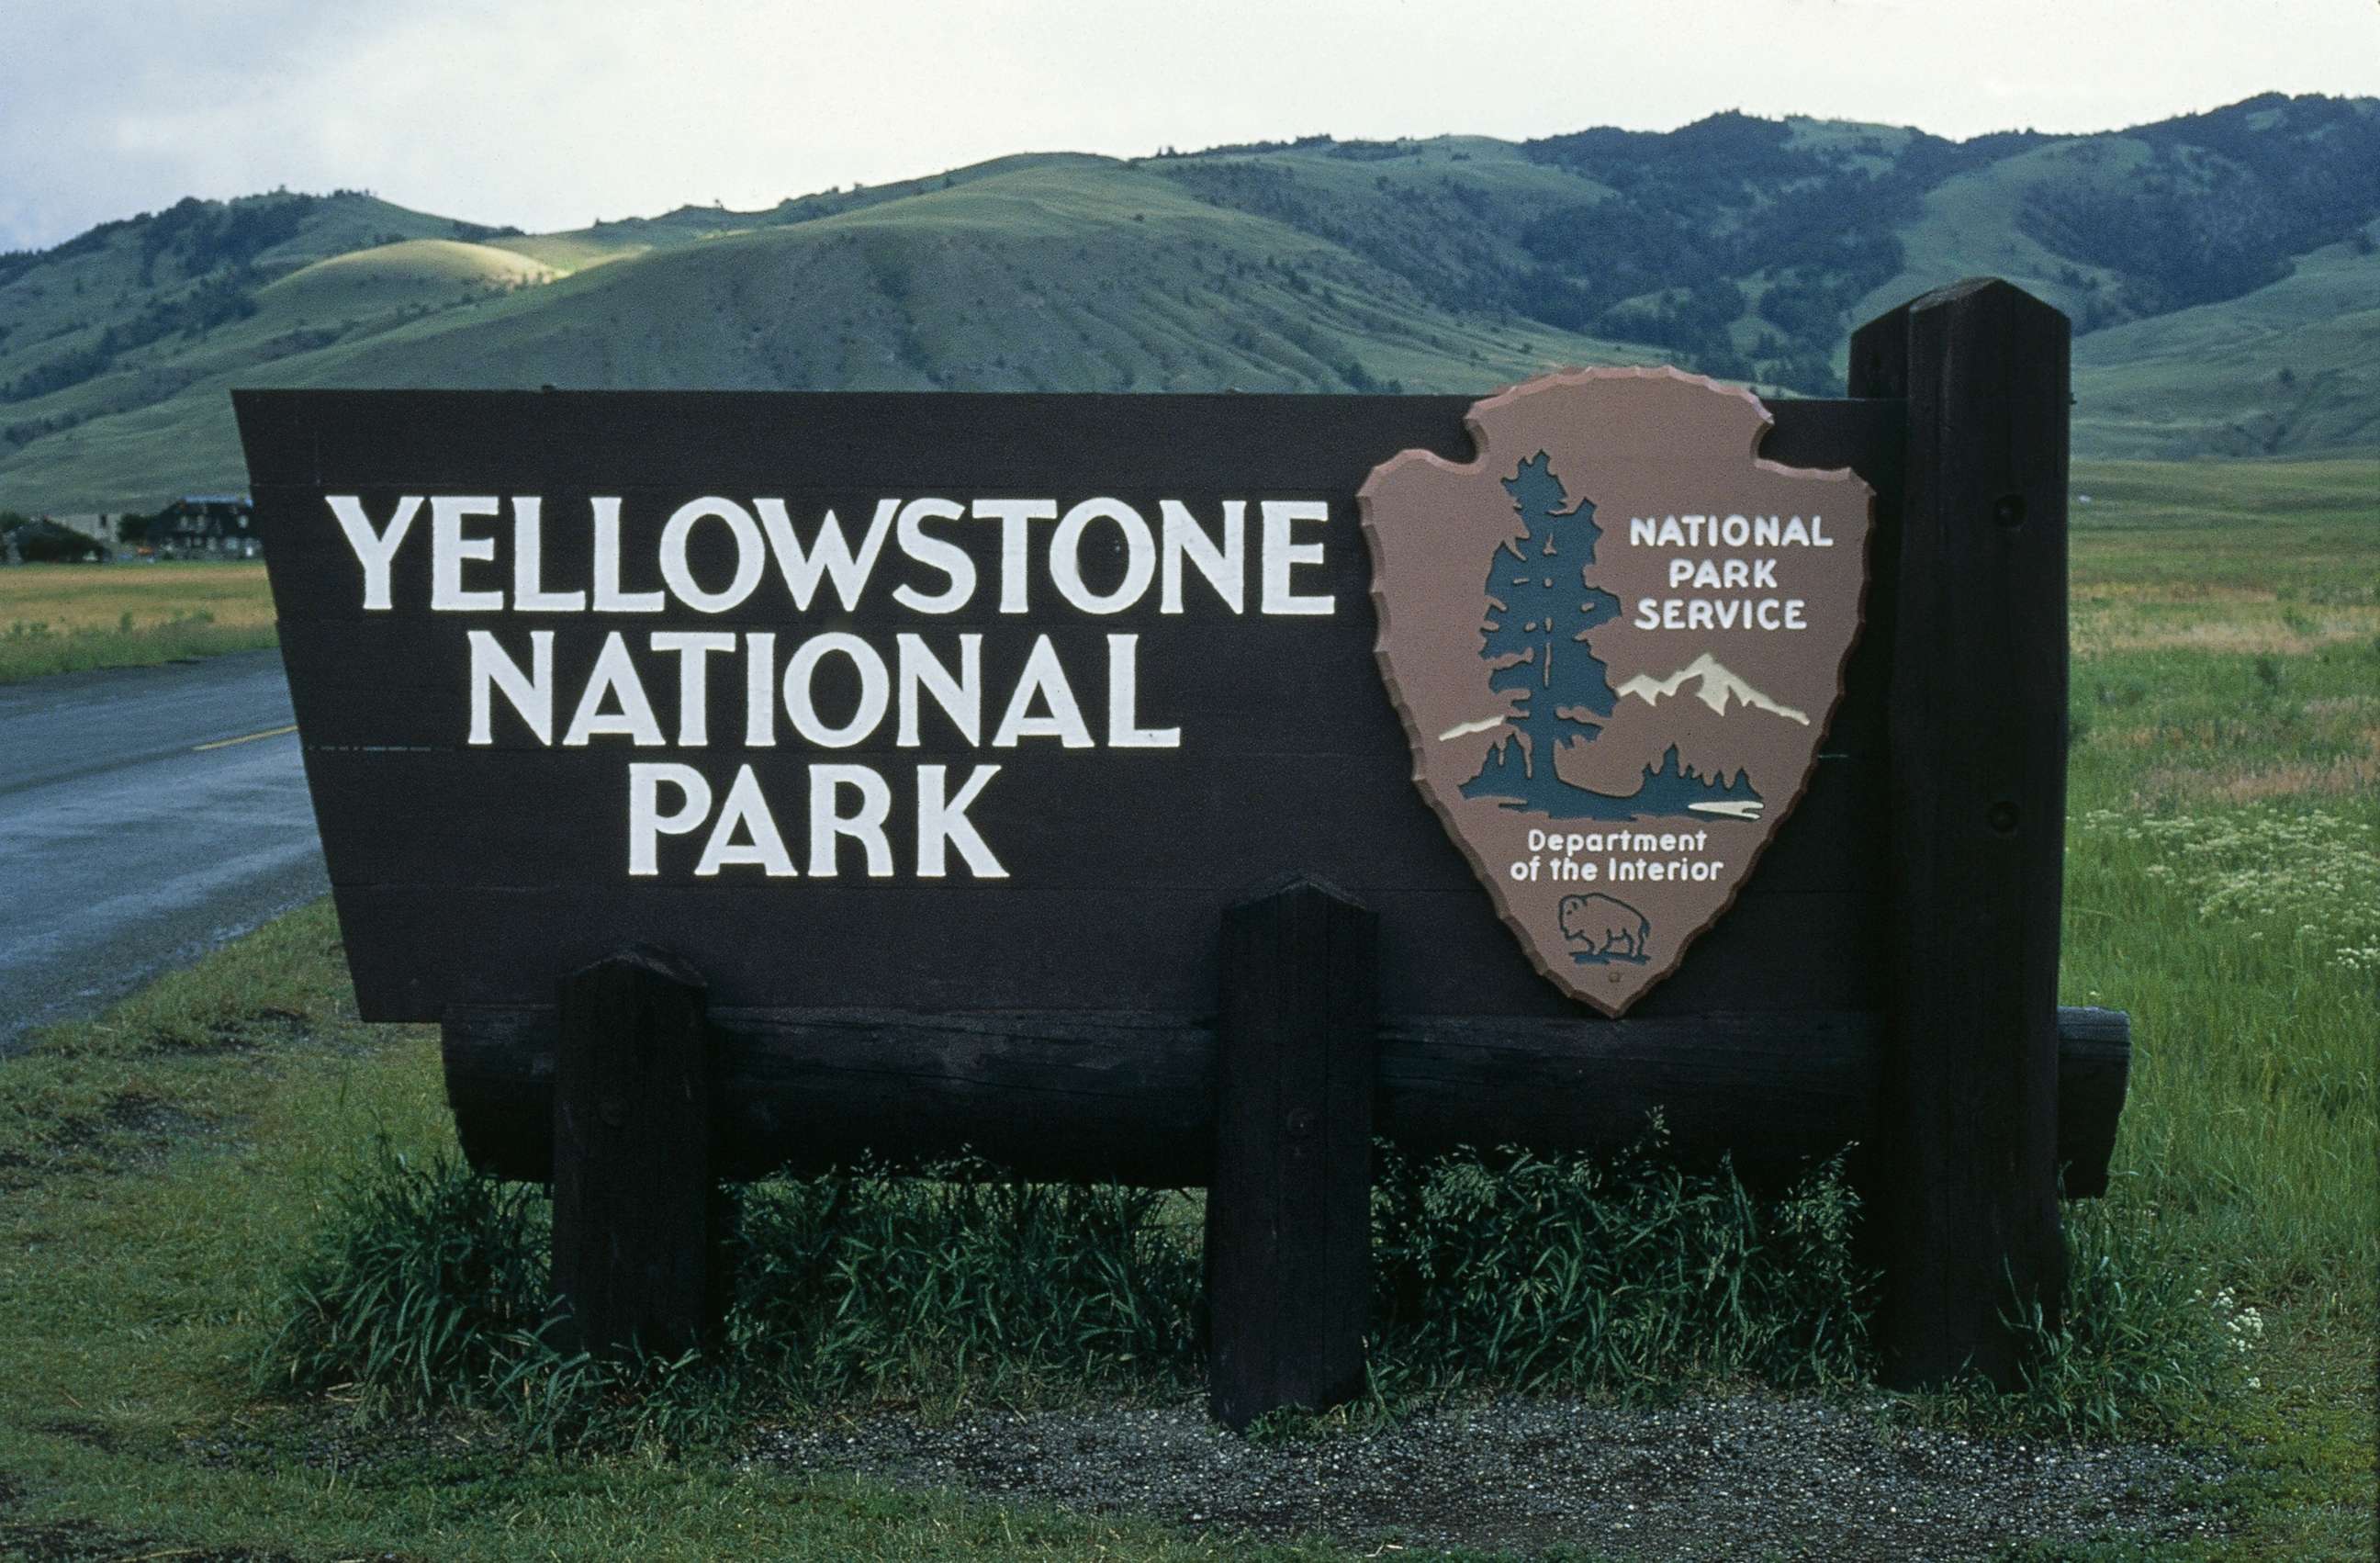 PHOTO: A sign for Yellowstone National Park in Wyoming is pictured in this file photo.